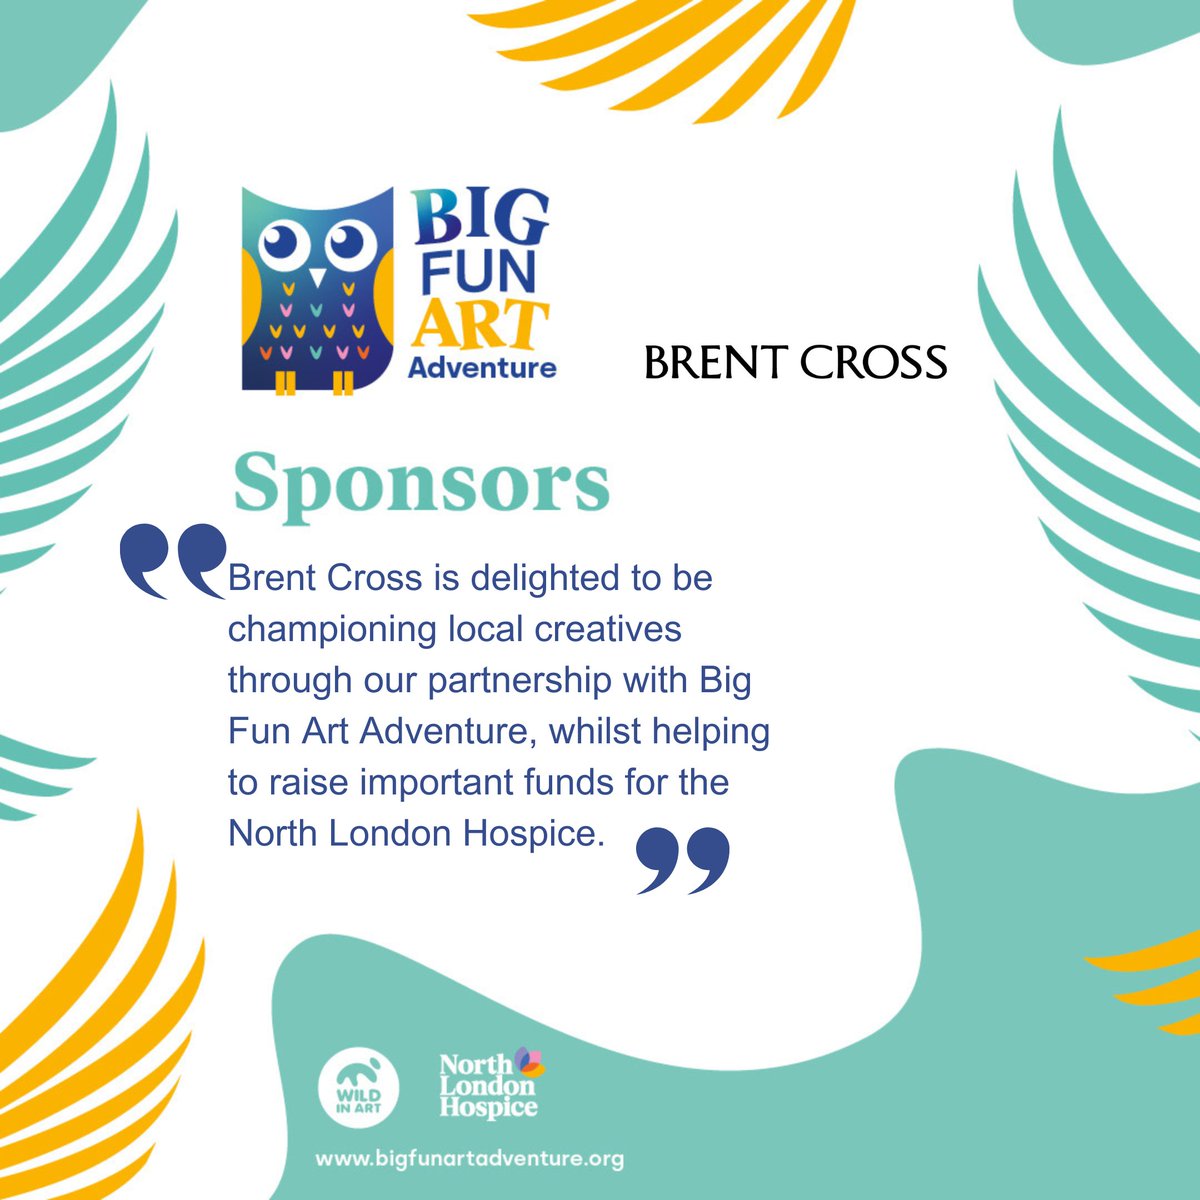 We're so happy to have the iconic @brentcross_sc join us as a  sponsor for Big Fun Art Adventure coming to North London this summer!

#BigFunArt #Owlbertsadventure #Wildinart